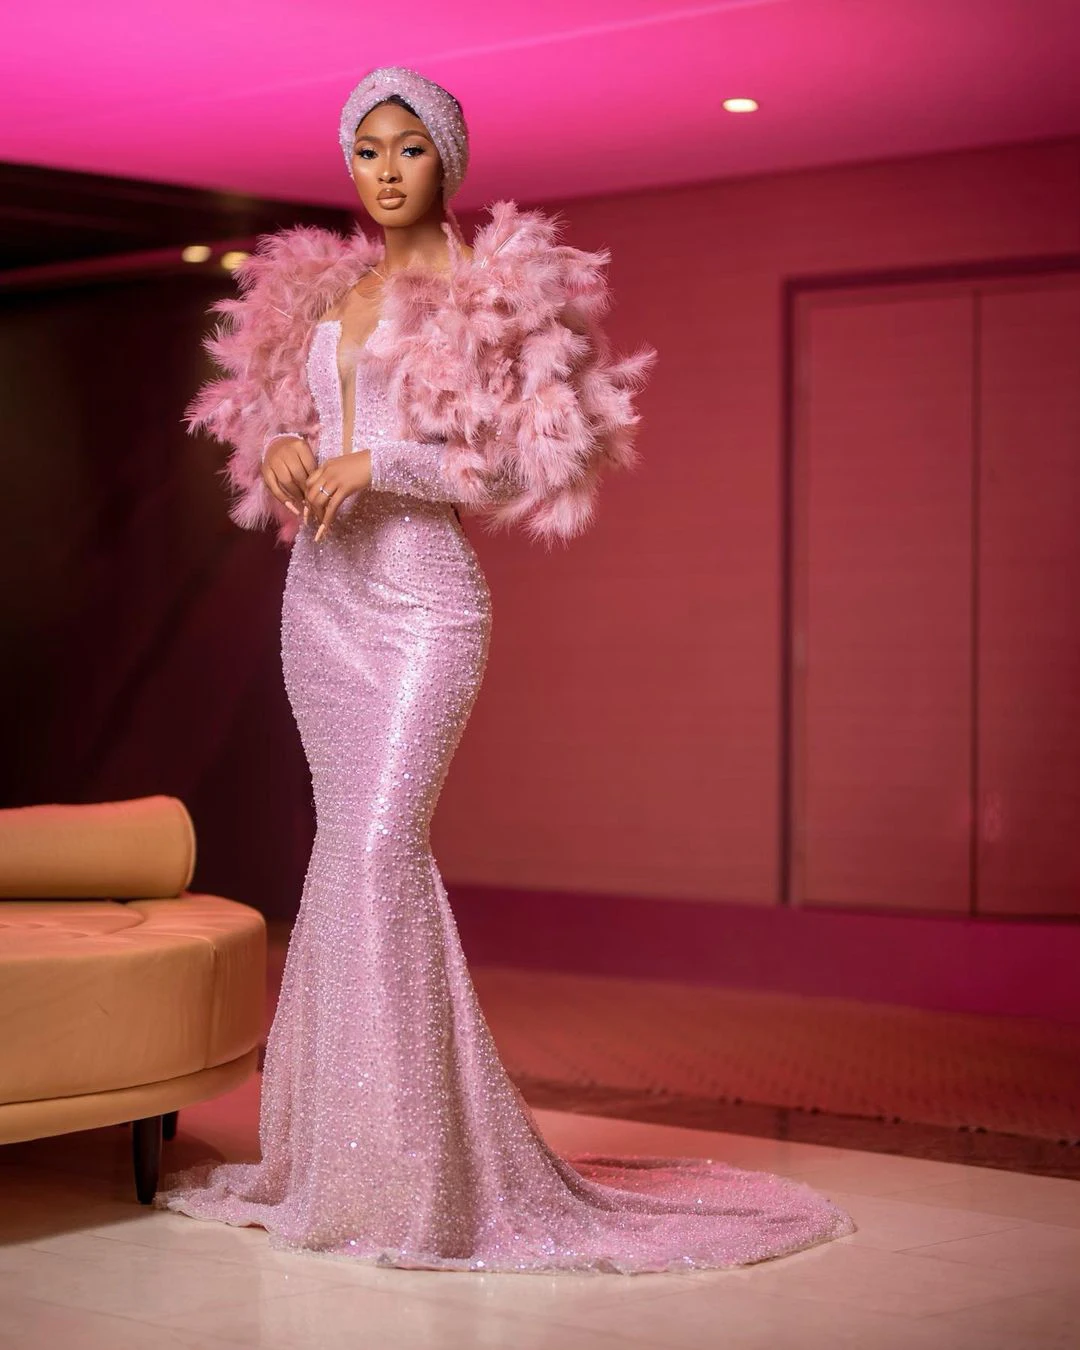 

Luxurious Feathered Long Sleeve Prom Dress Fluffy Beaded Sequined Evening Dress Mermaid Aso Ebi Birthday Party Dress